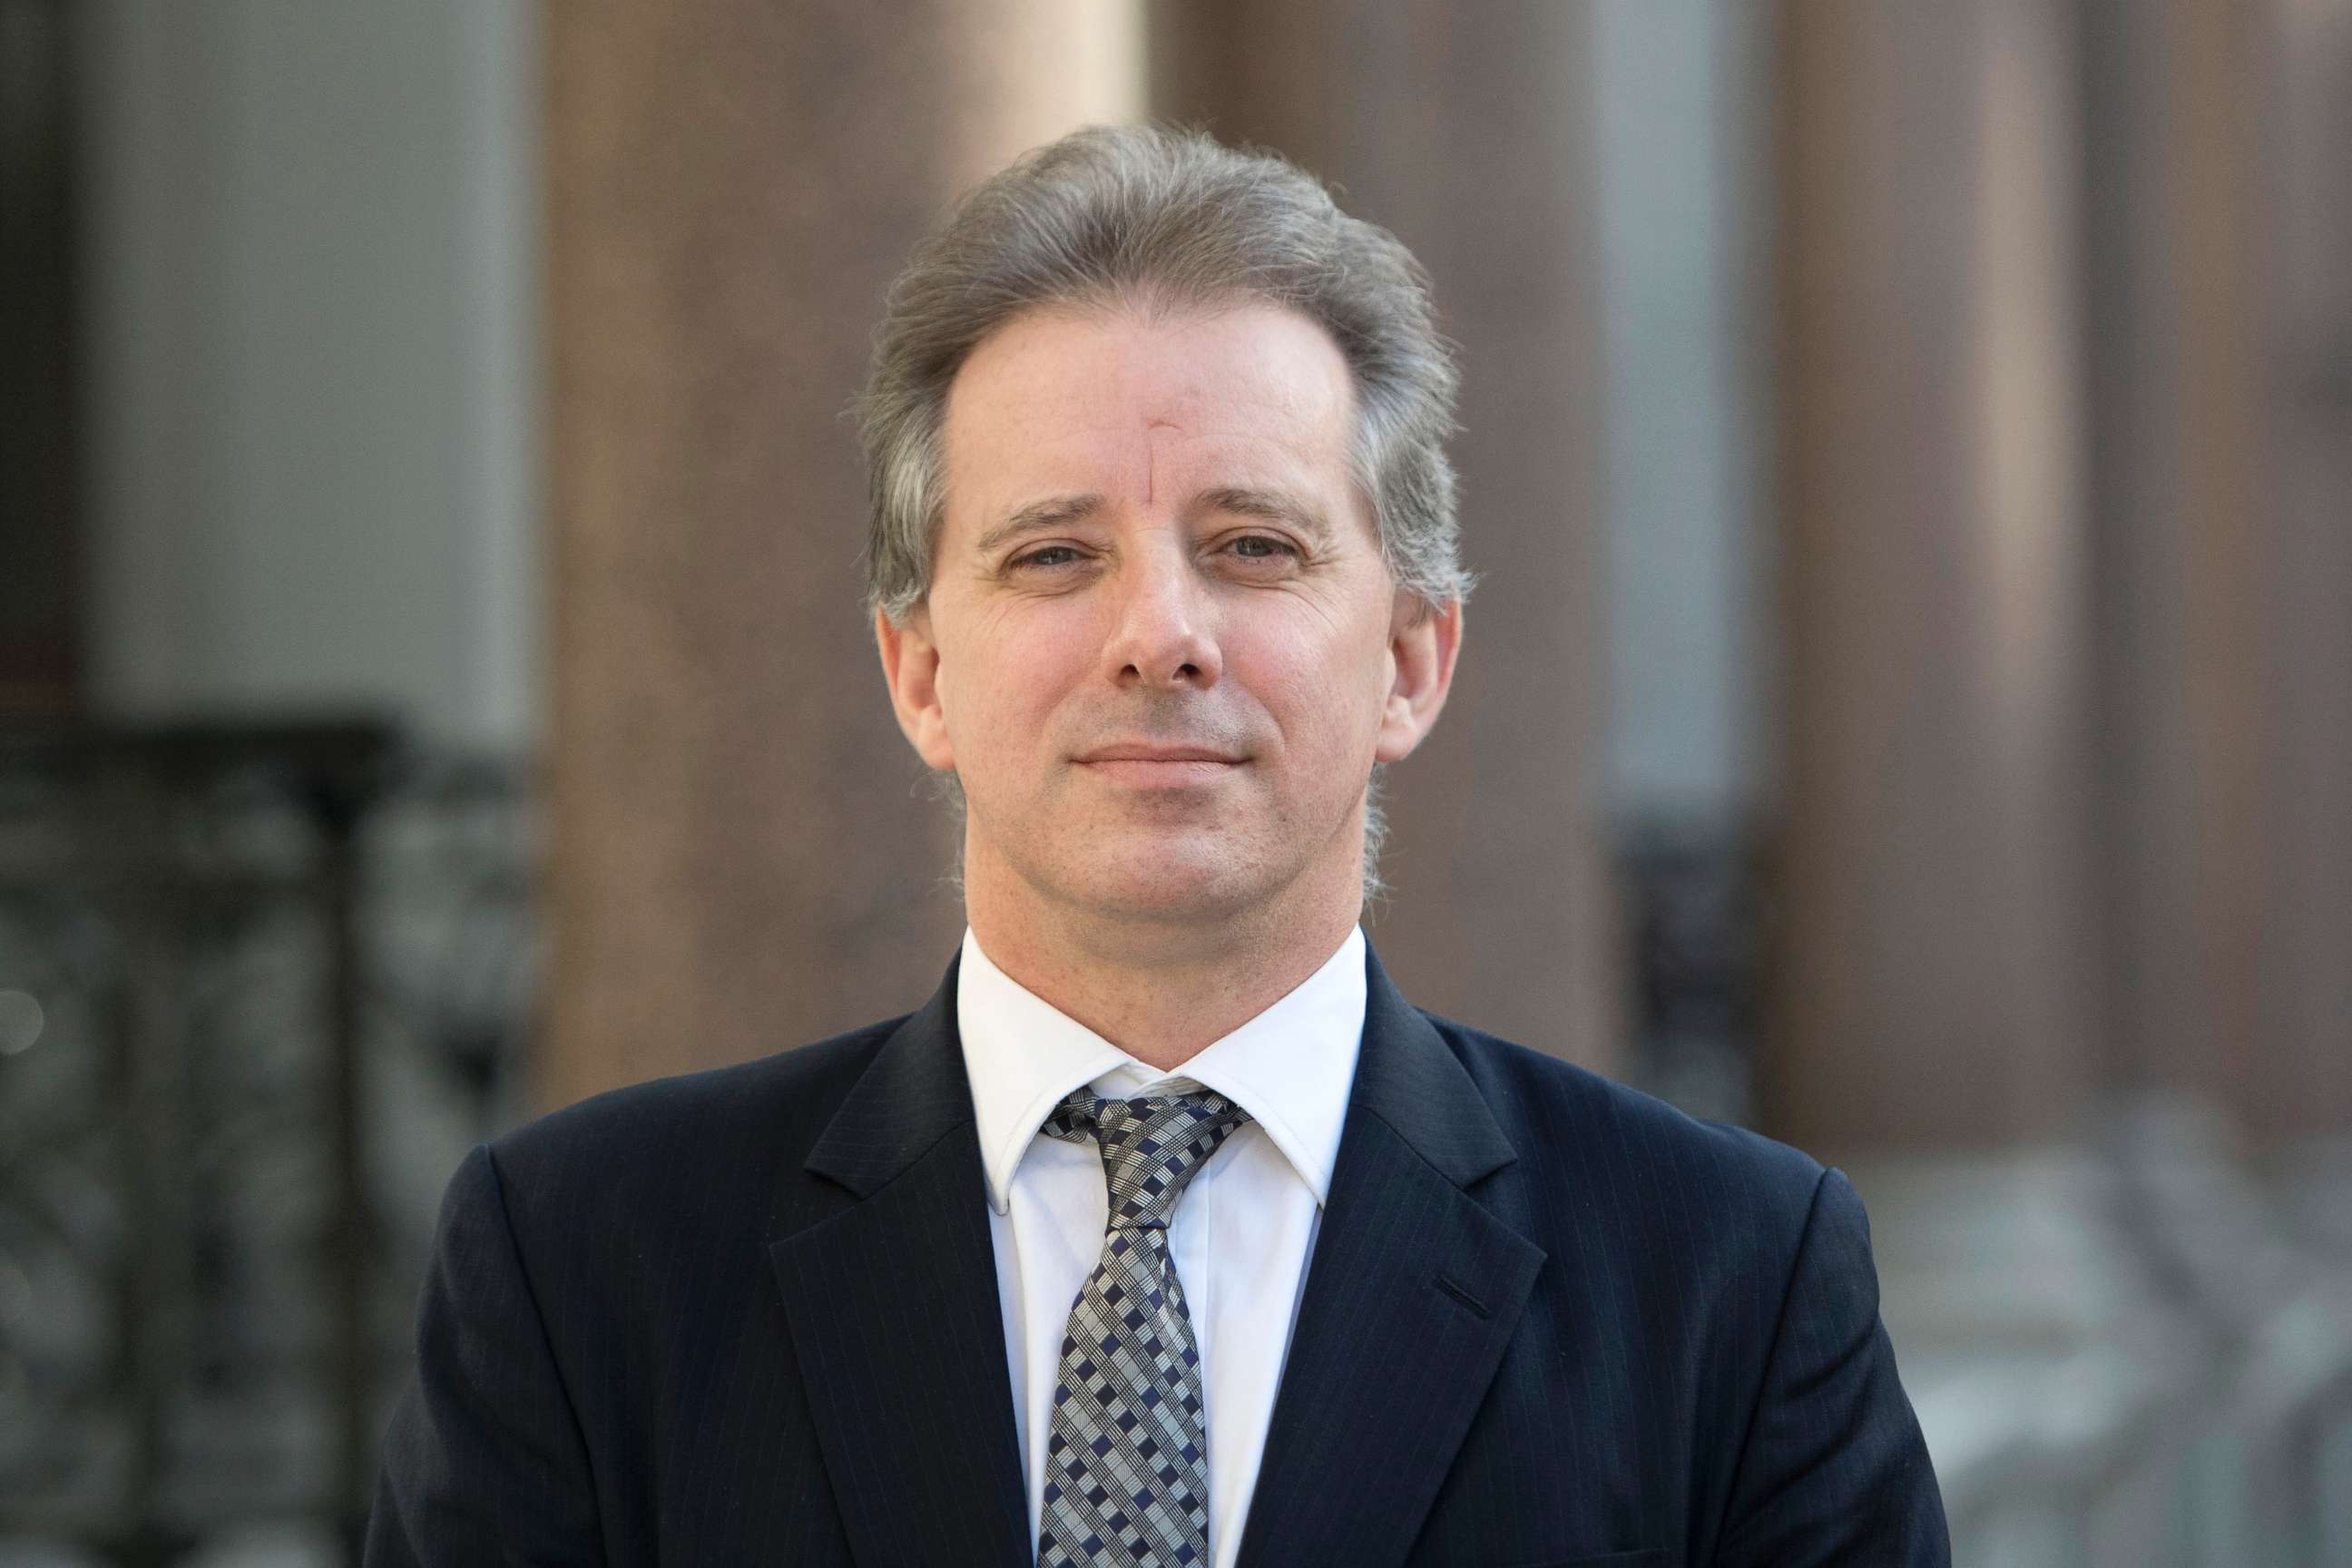 PHOTO: Christopher Steele, the former MI6 agent who set-up Orbis Business Intelligence and compiled a dossier on Donald Trump, in London where he has spoken to the media for the first time, March 7, 2017.